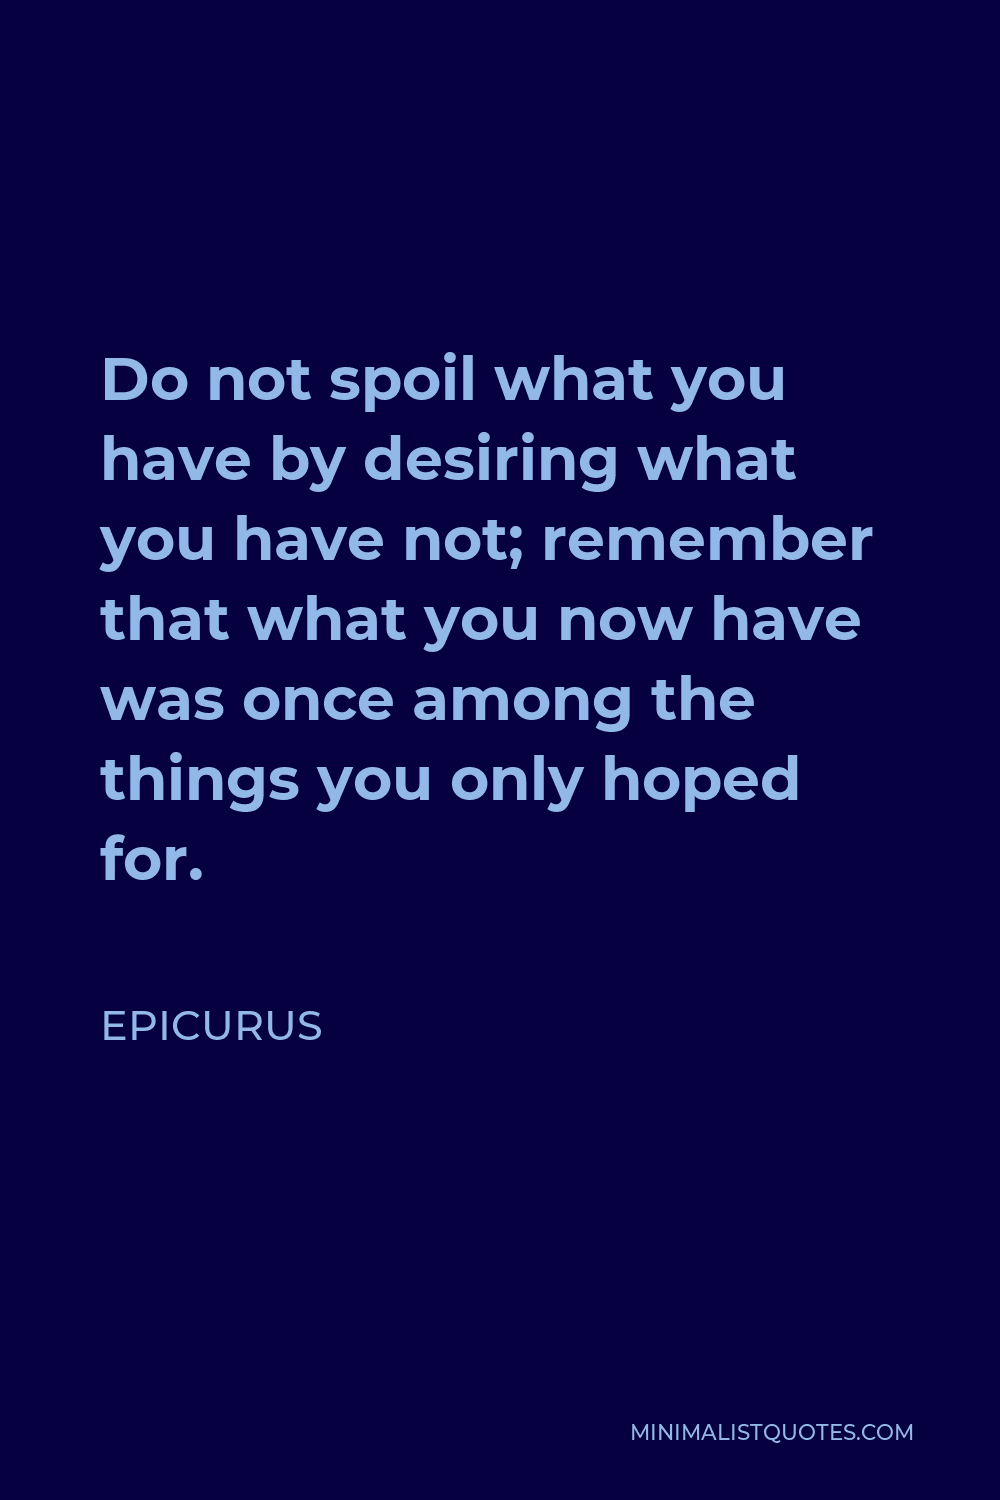 Epicurus Quote - Do not spoil what you have by desiring what you have not; remember that what you now have was once among the things you only hoped for.